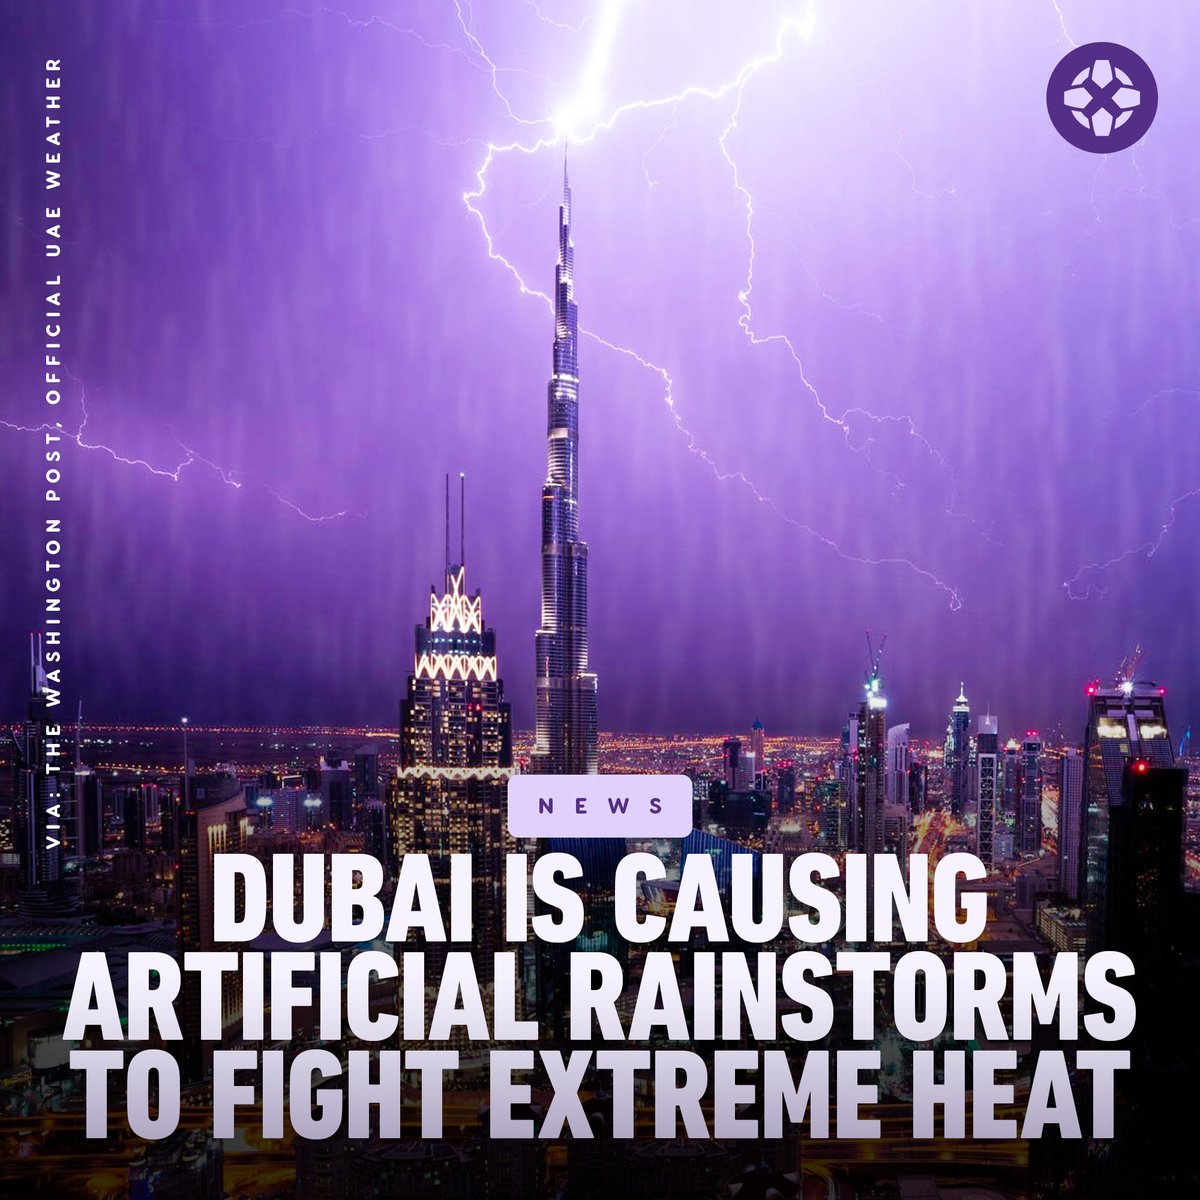 With temperatures in Dubai reaching 115 degrees Fahrenheit, the UAE is using a technique called 'cloud seeding' where they launch a drone into the clouds, determine the precise voltage required to make them release large droplets, then zap them to generate heavy rainfall. ⛈️